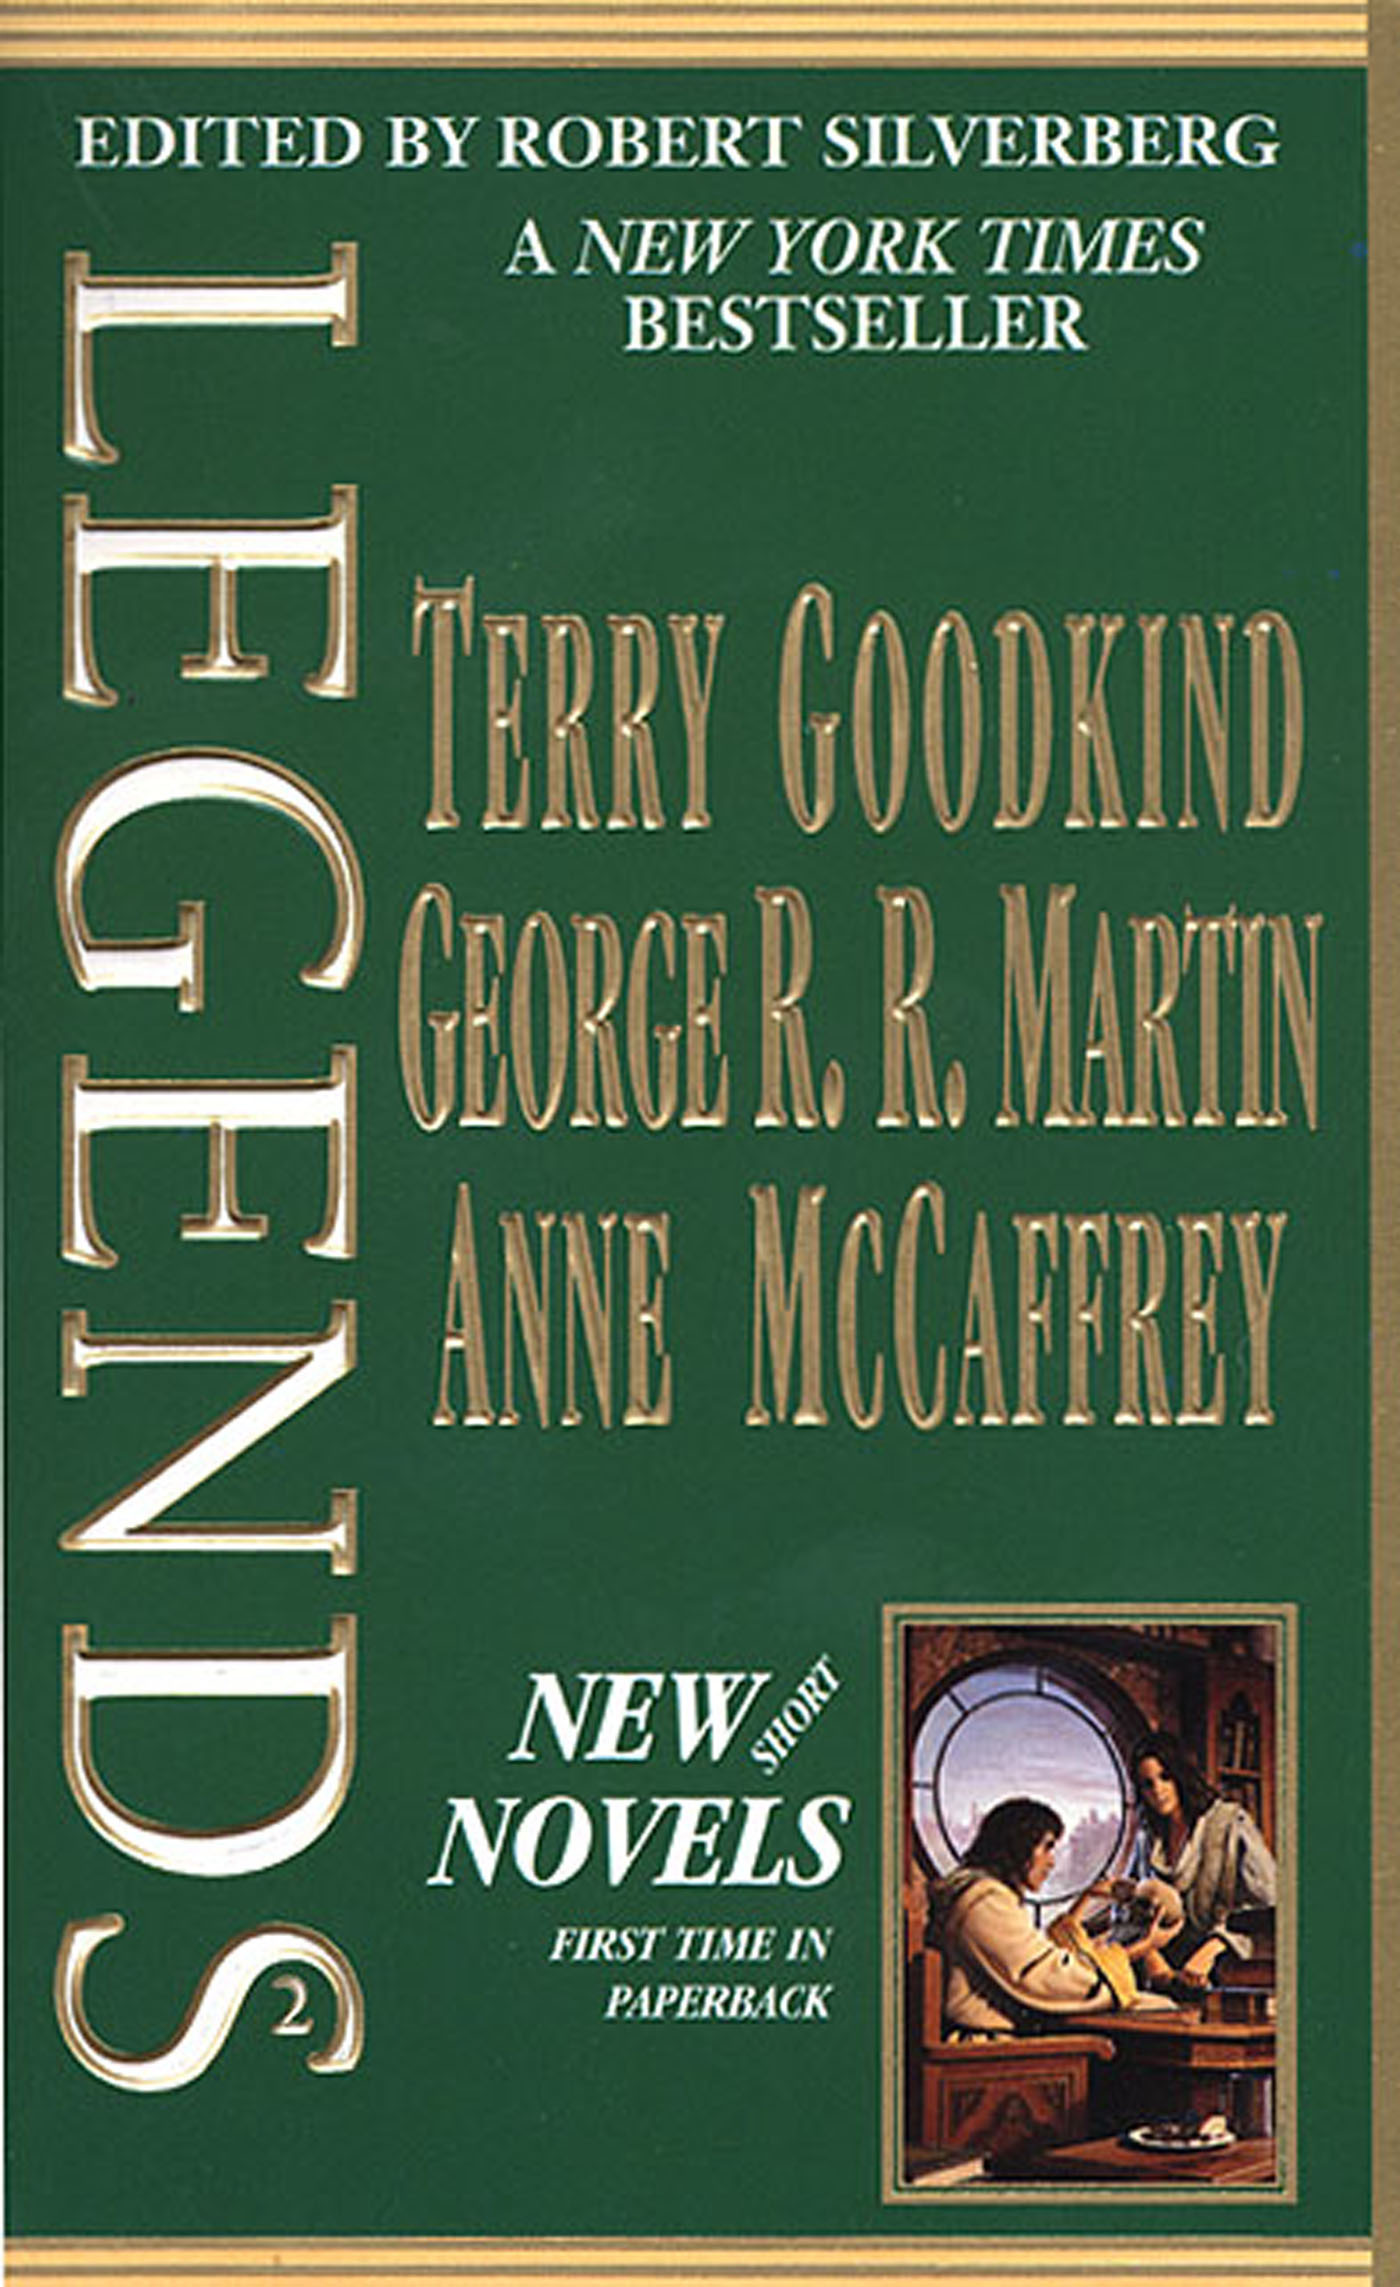 Legends 2: New Short Novels By The Masters of Modern Fantasy by Robert Silverberg, George R. R. Martin, Robert Silverberg, Anne McCaffrey, Terry Goodkind